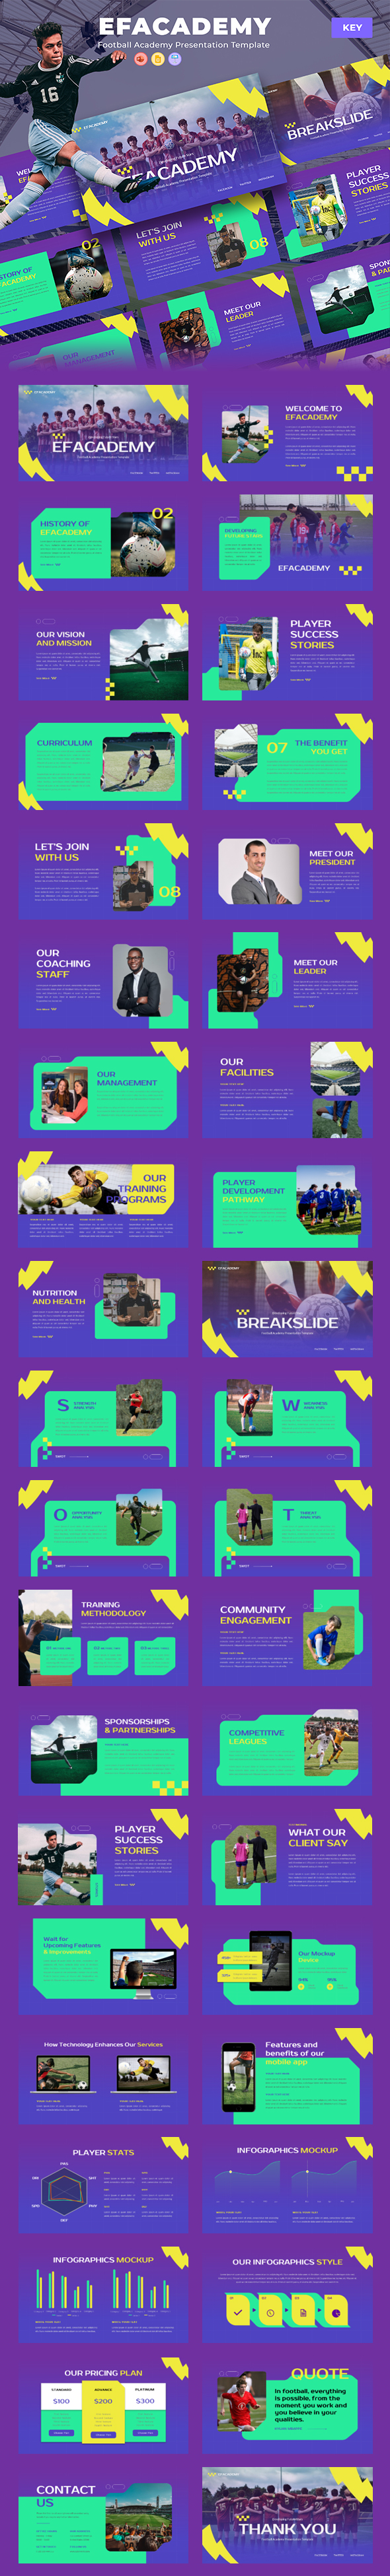 [DOWNLOAD]Efacademy – Football Academy Keynote Template